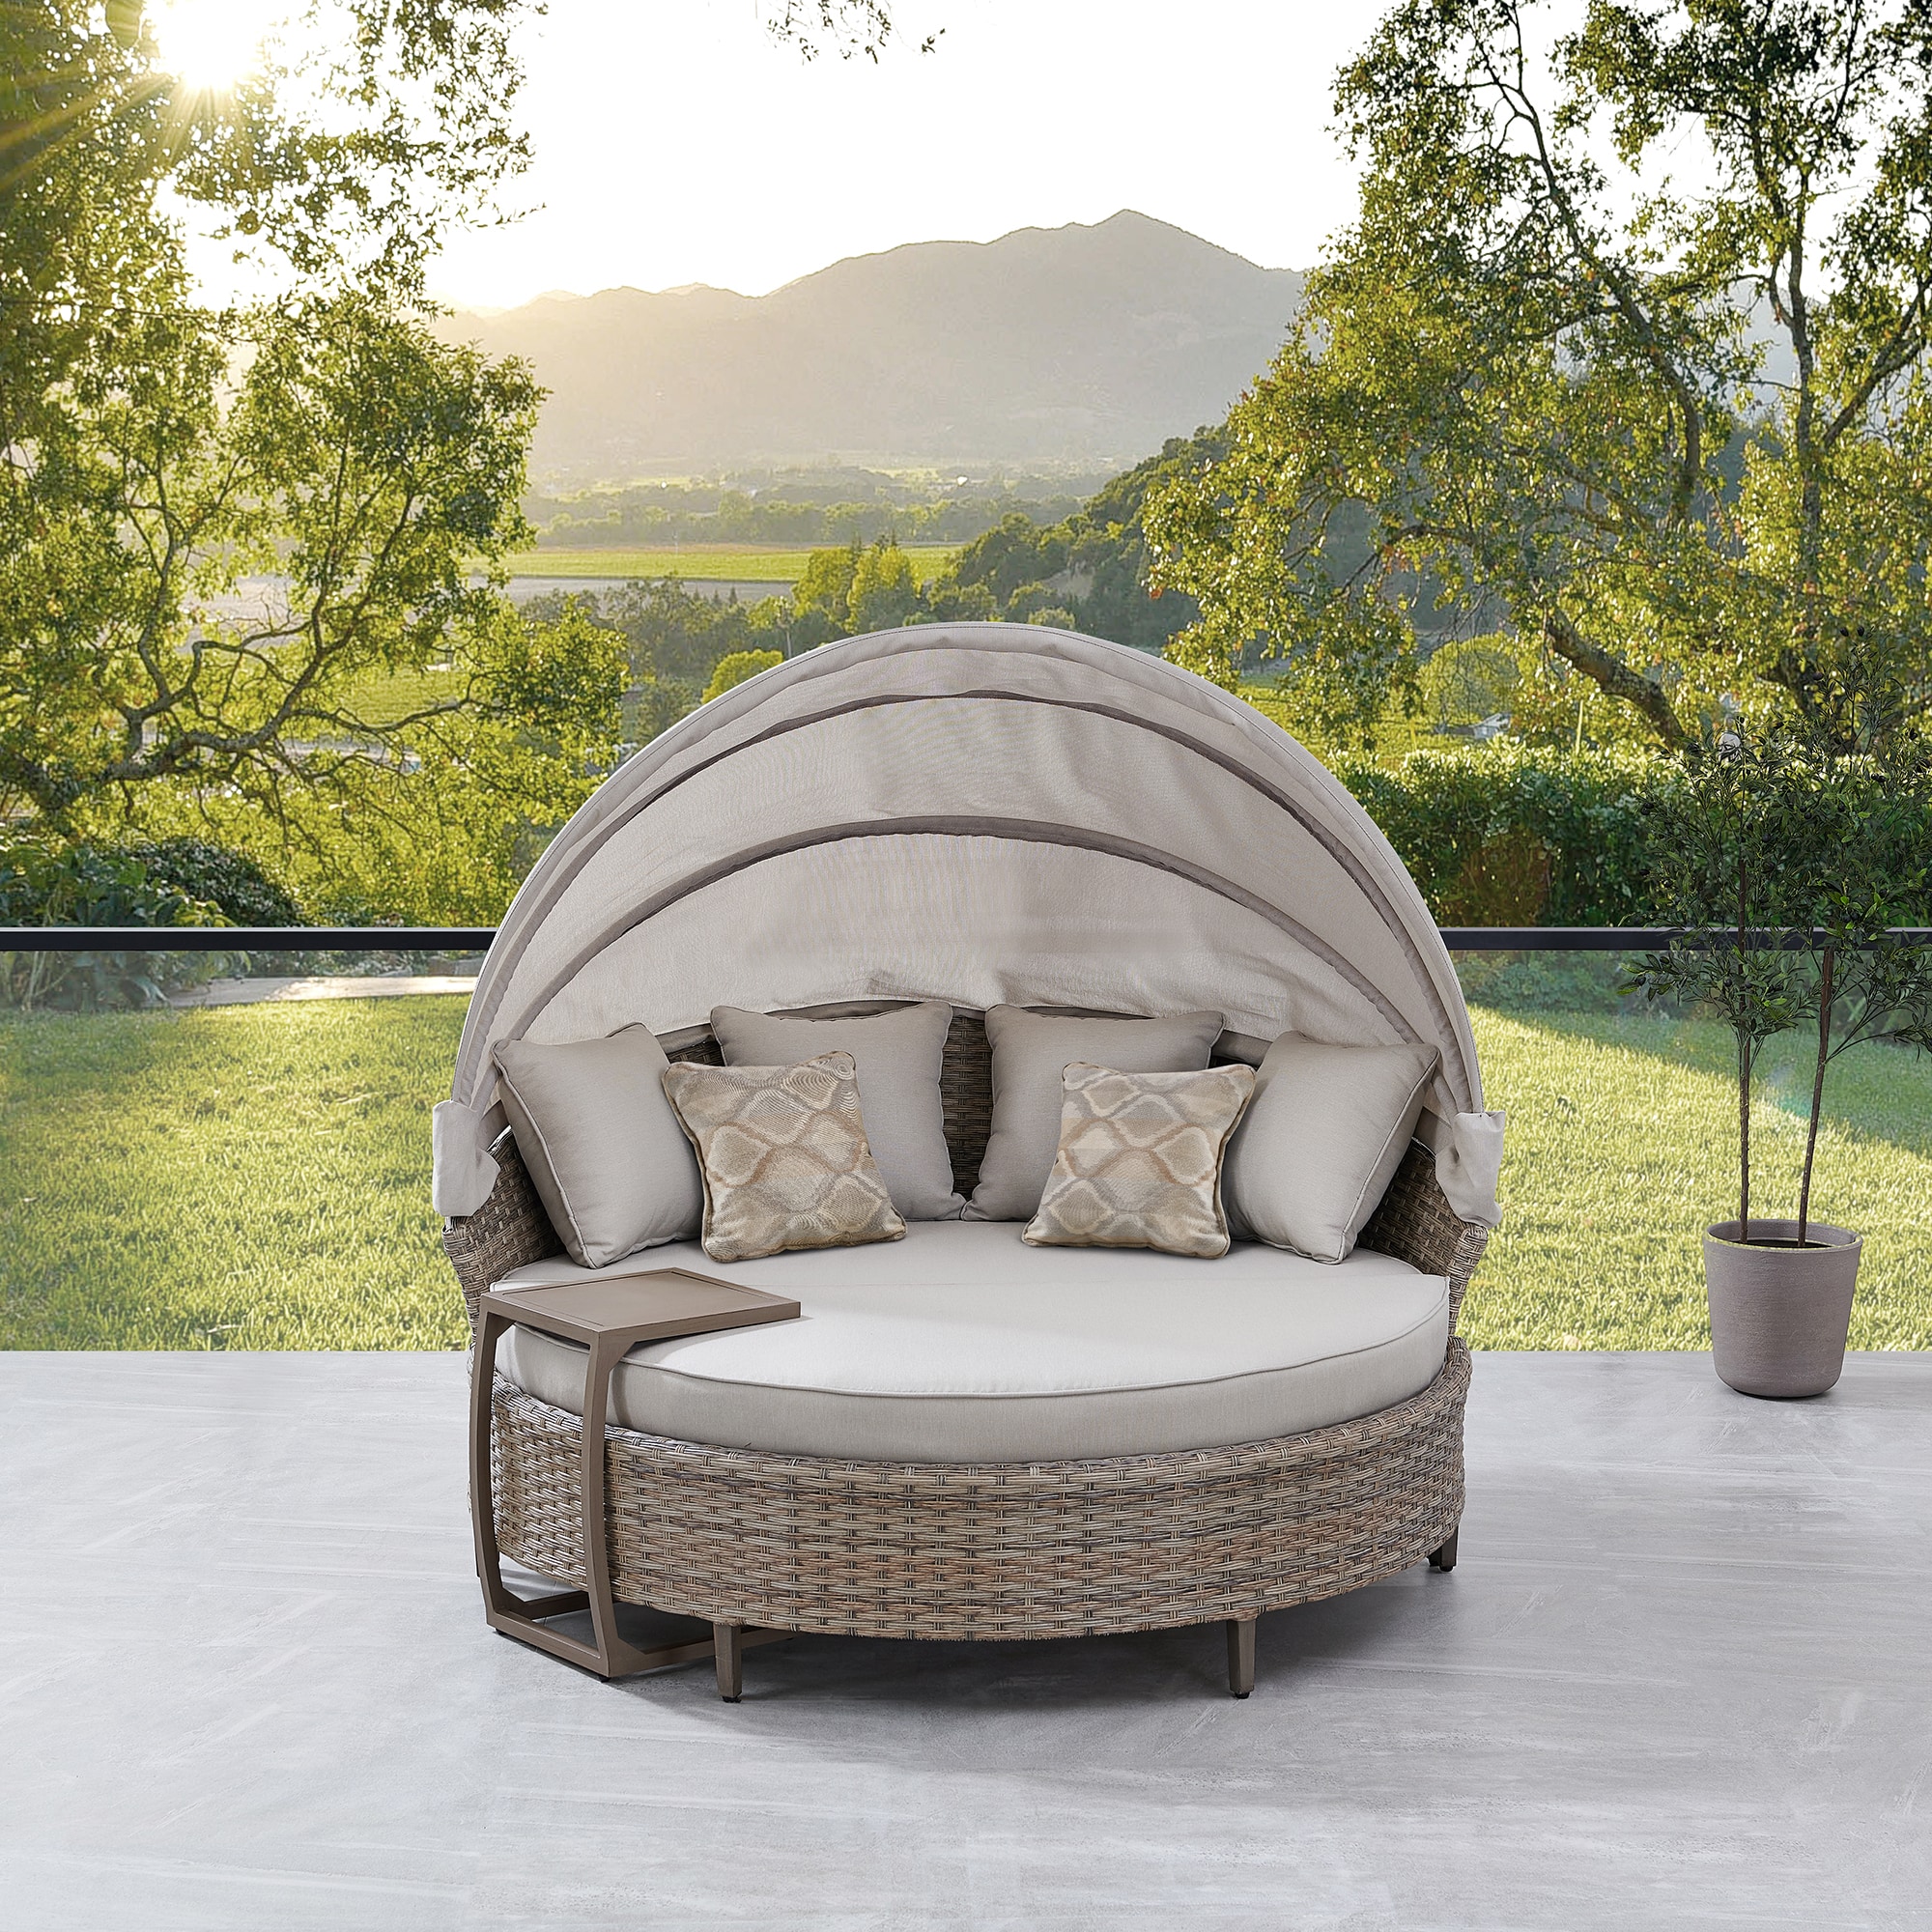 OVE Decors Bottega Wicker Outdoor Daybed with Tan Cushion(S) and ...